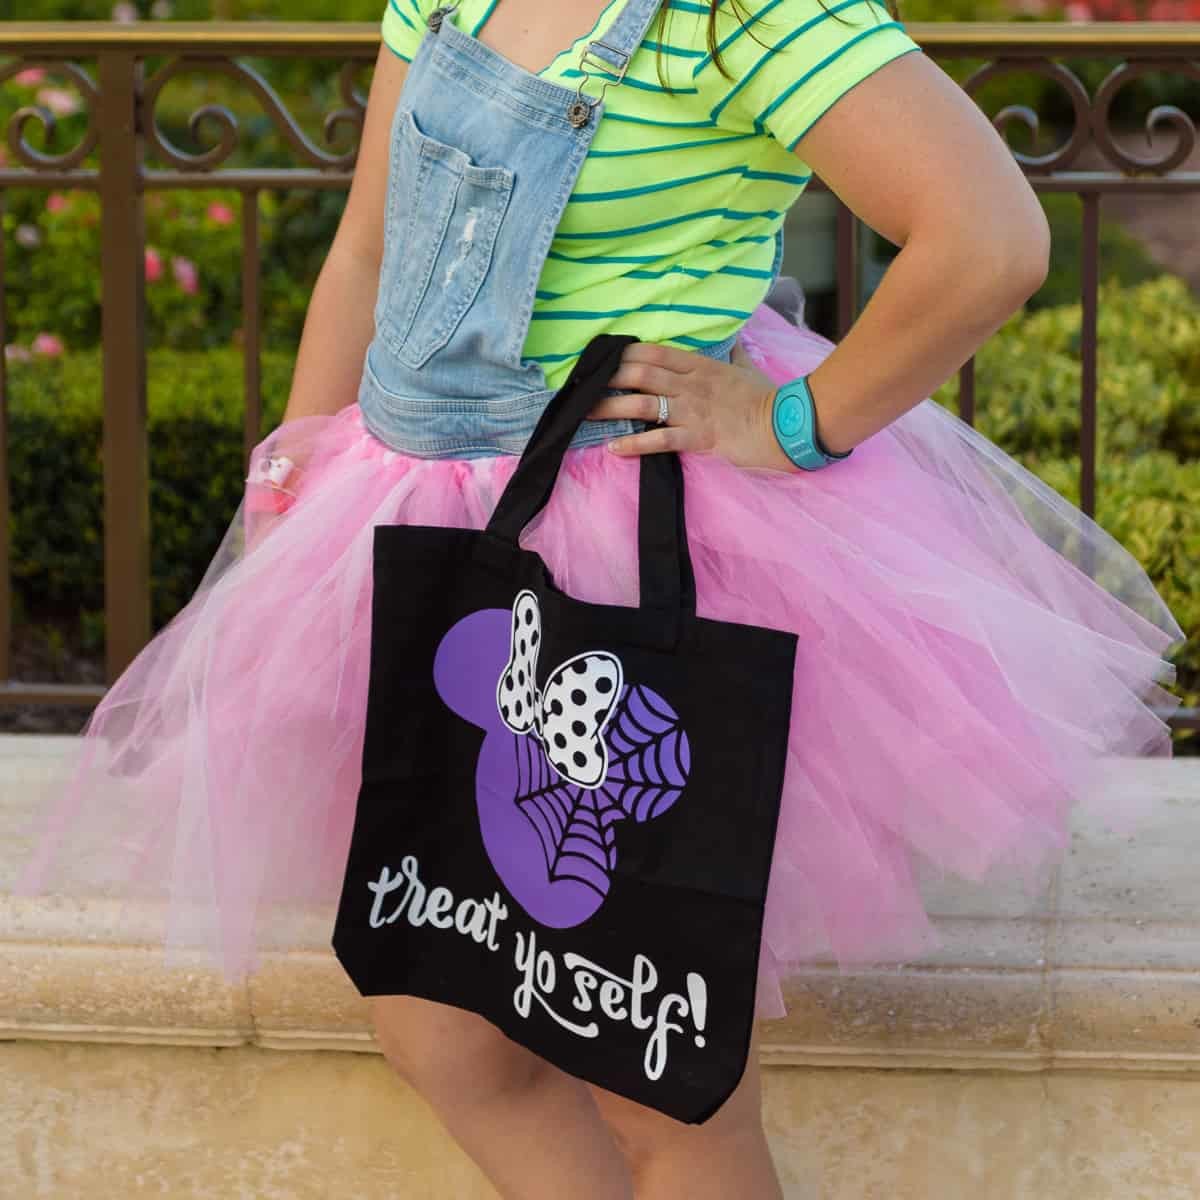 Bonnie from Toy Story 4 Tutu Costume at Disney World